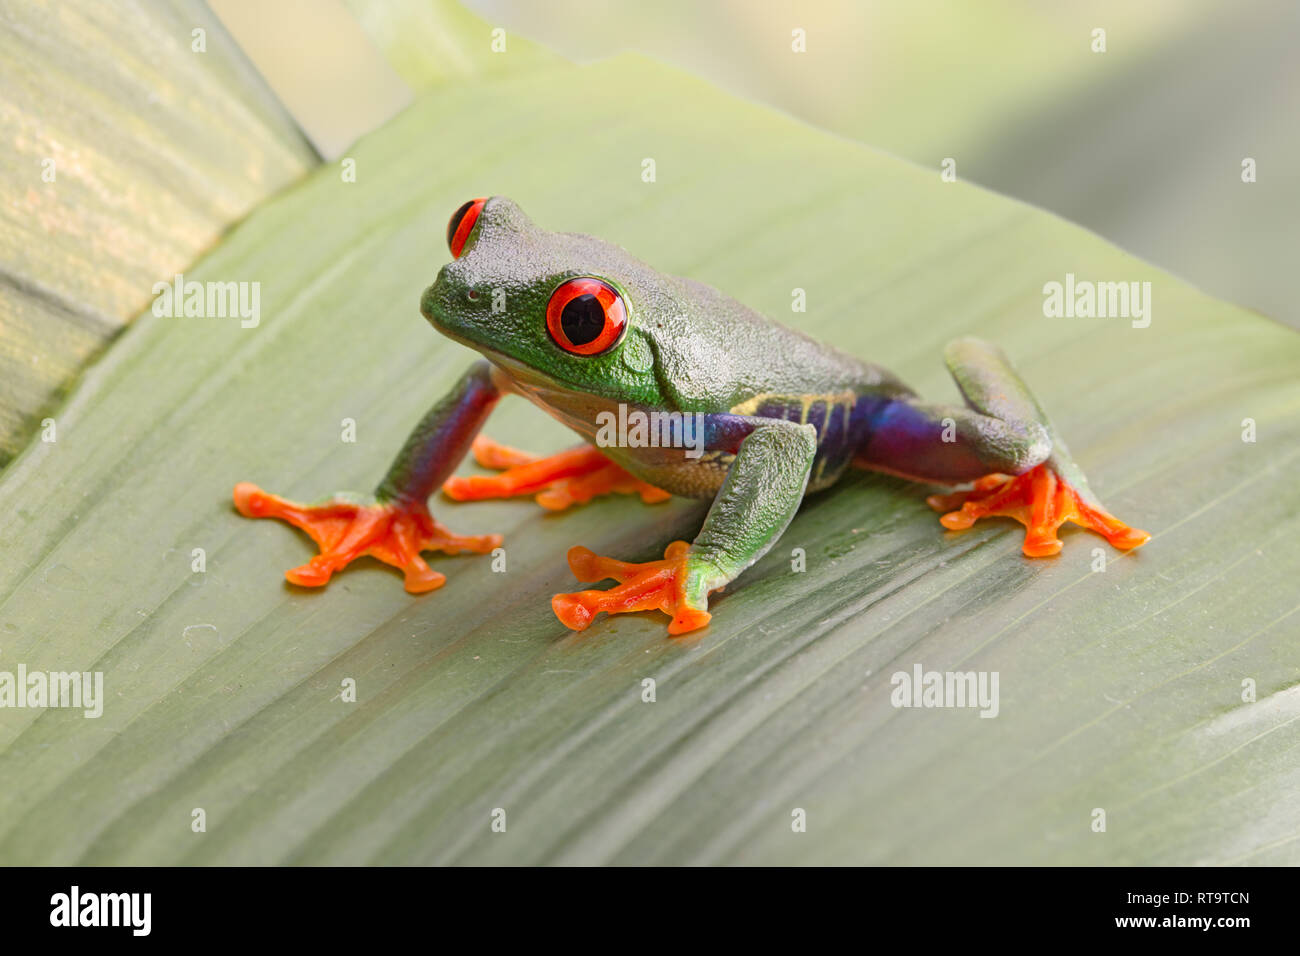 Red eyed tree frog, or Agalychnis callydrias a small beautiful amphibian from the jungle of Costa Rica. Stock Photo